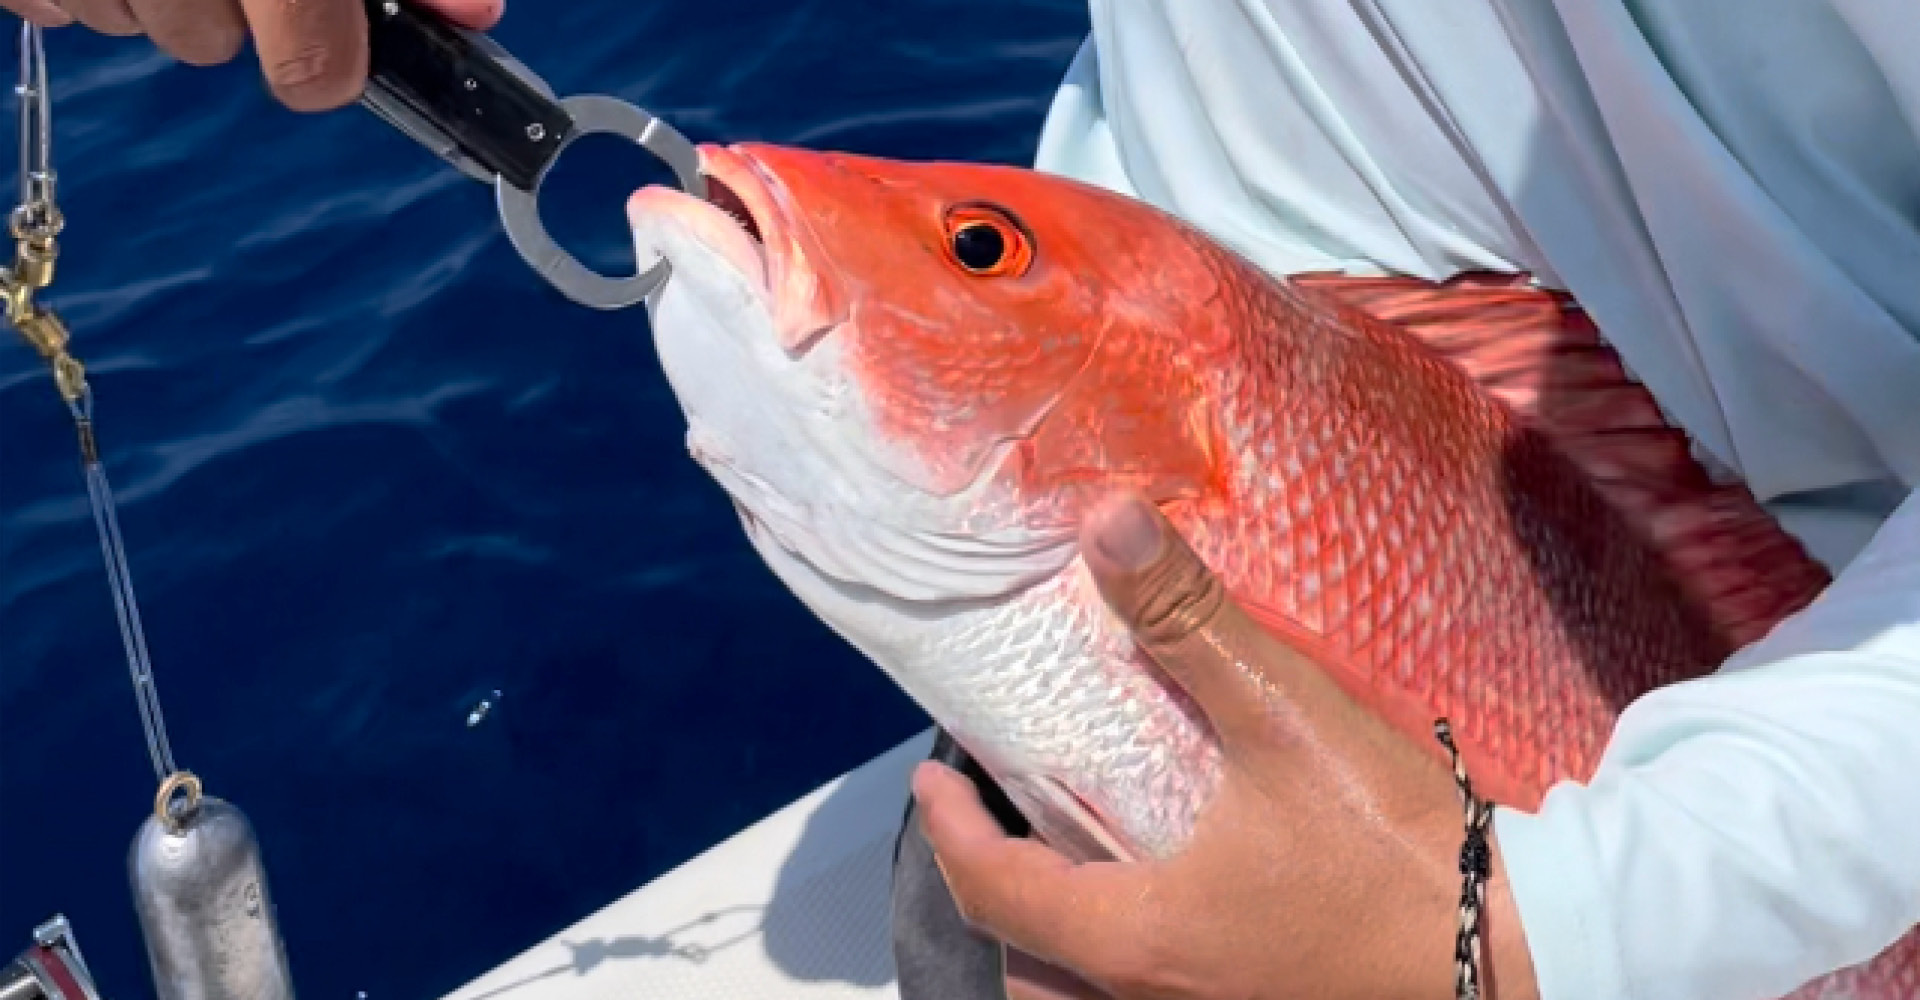 SeaQualizer descending device being used on red snapper